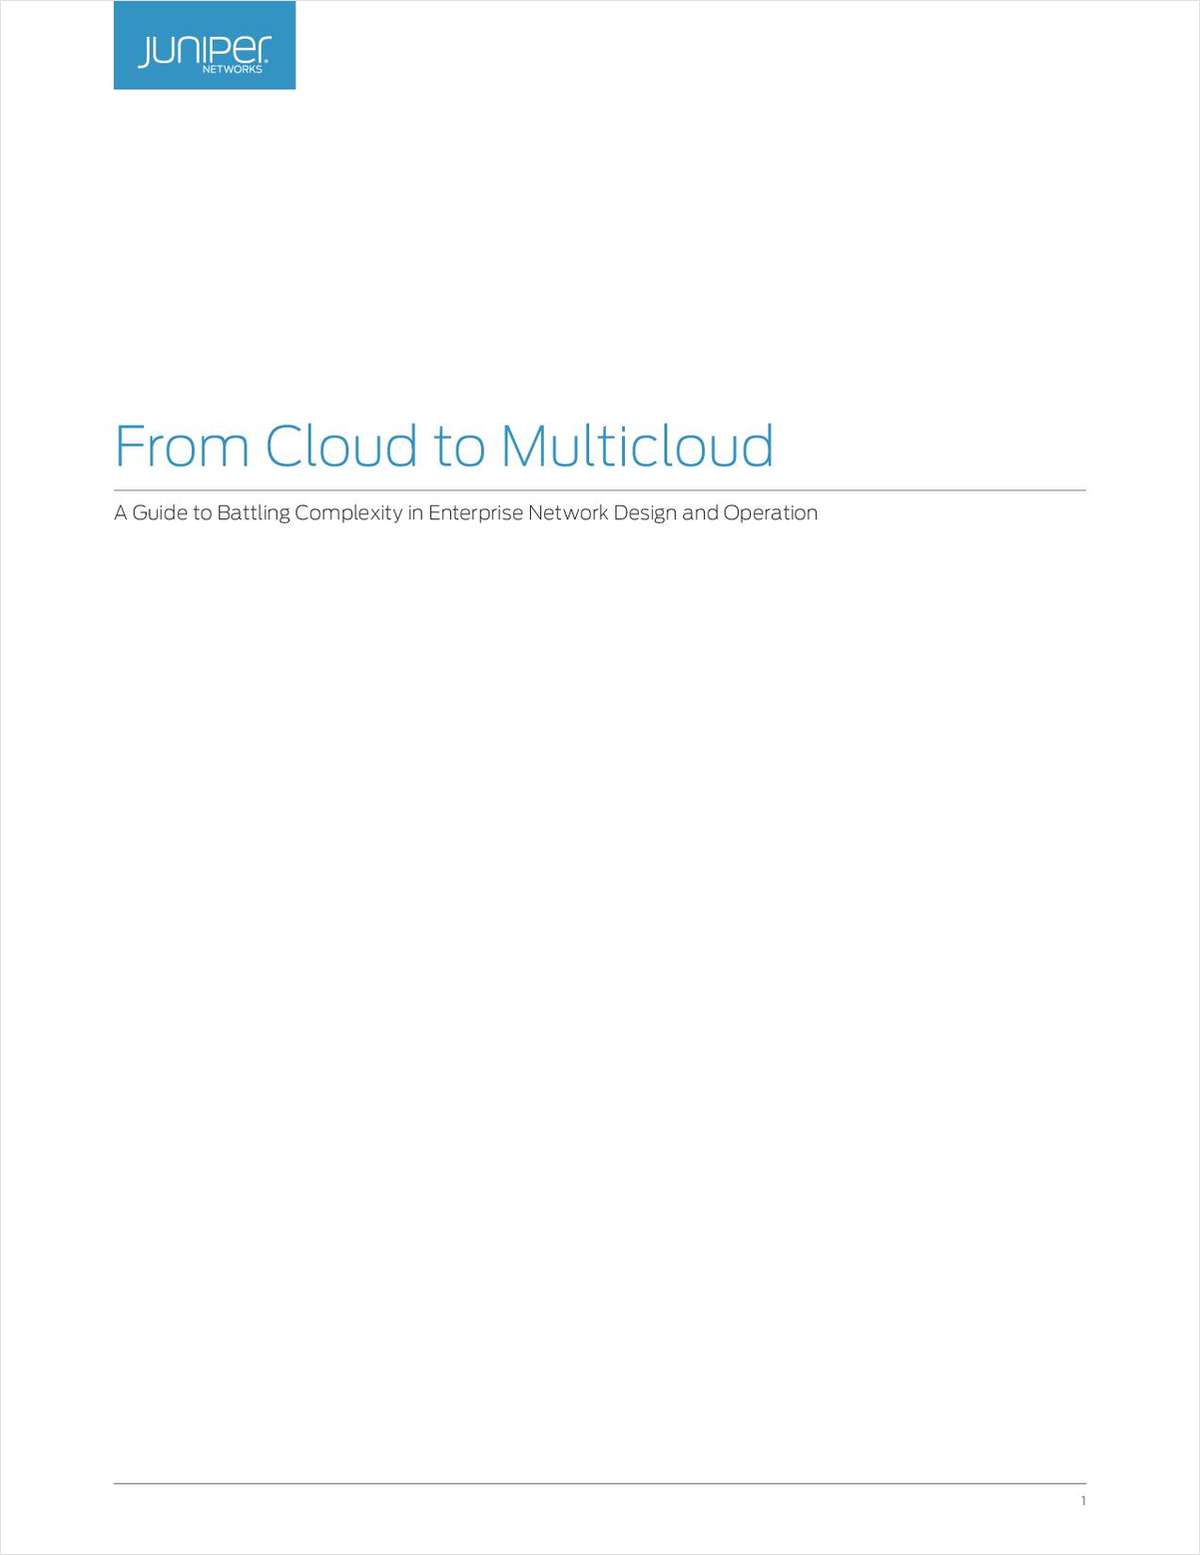 From Cloud to Multicloud: A Guide to Battling Complexity in Enterprise Network Design and Operation